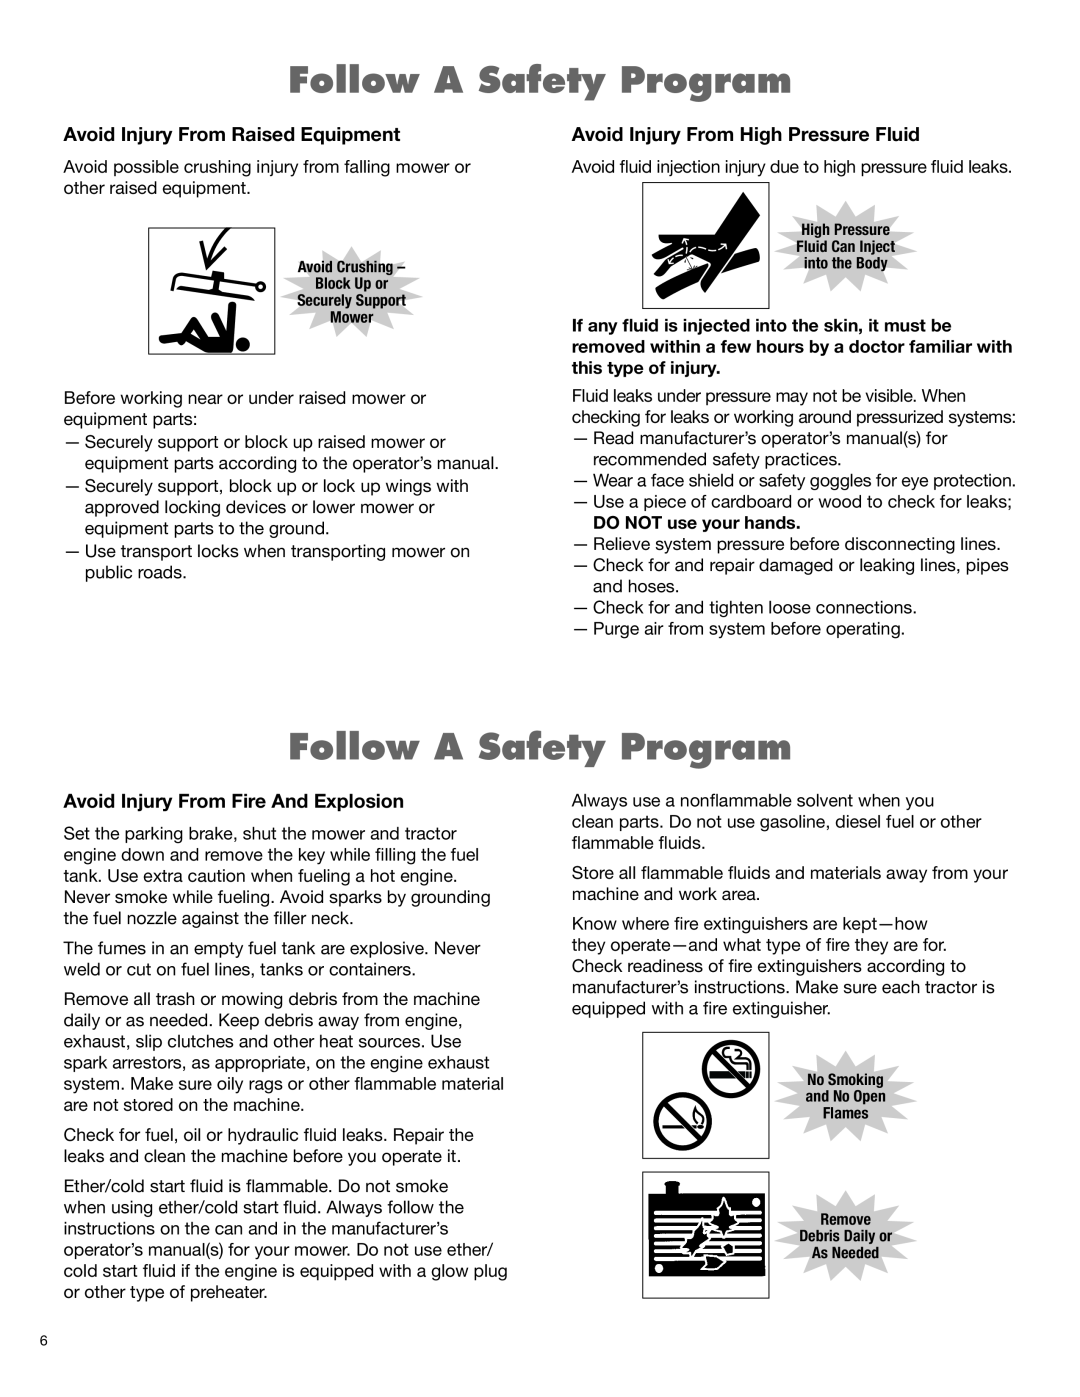 Alamo 1900 manual Follow A Safety Program, Avoid Injury From Raised Equipment, Avoid Injury From High Pressure Fluid 